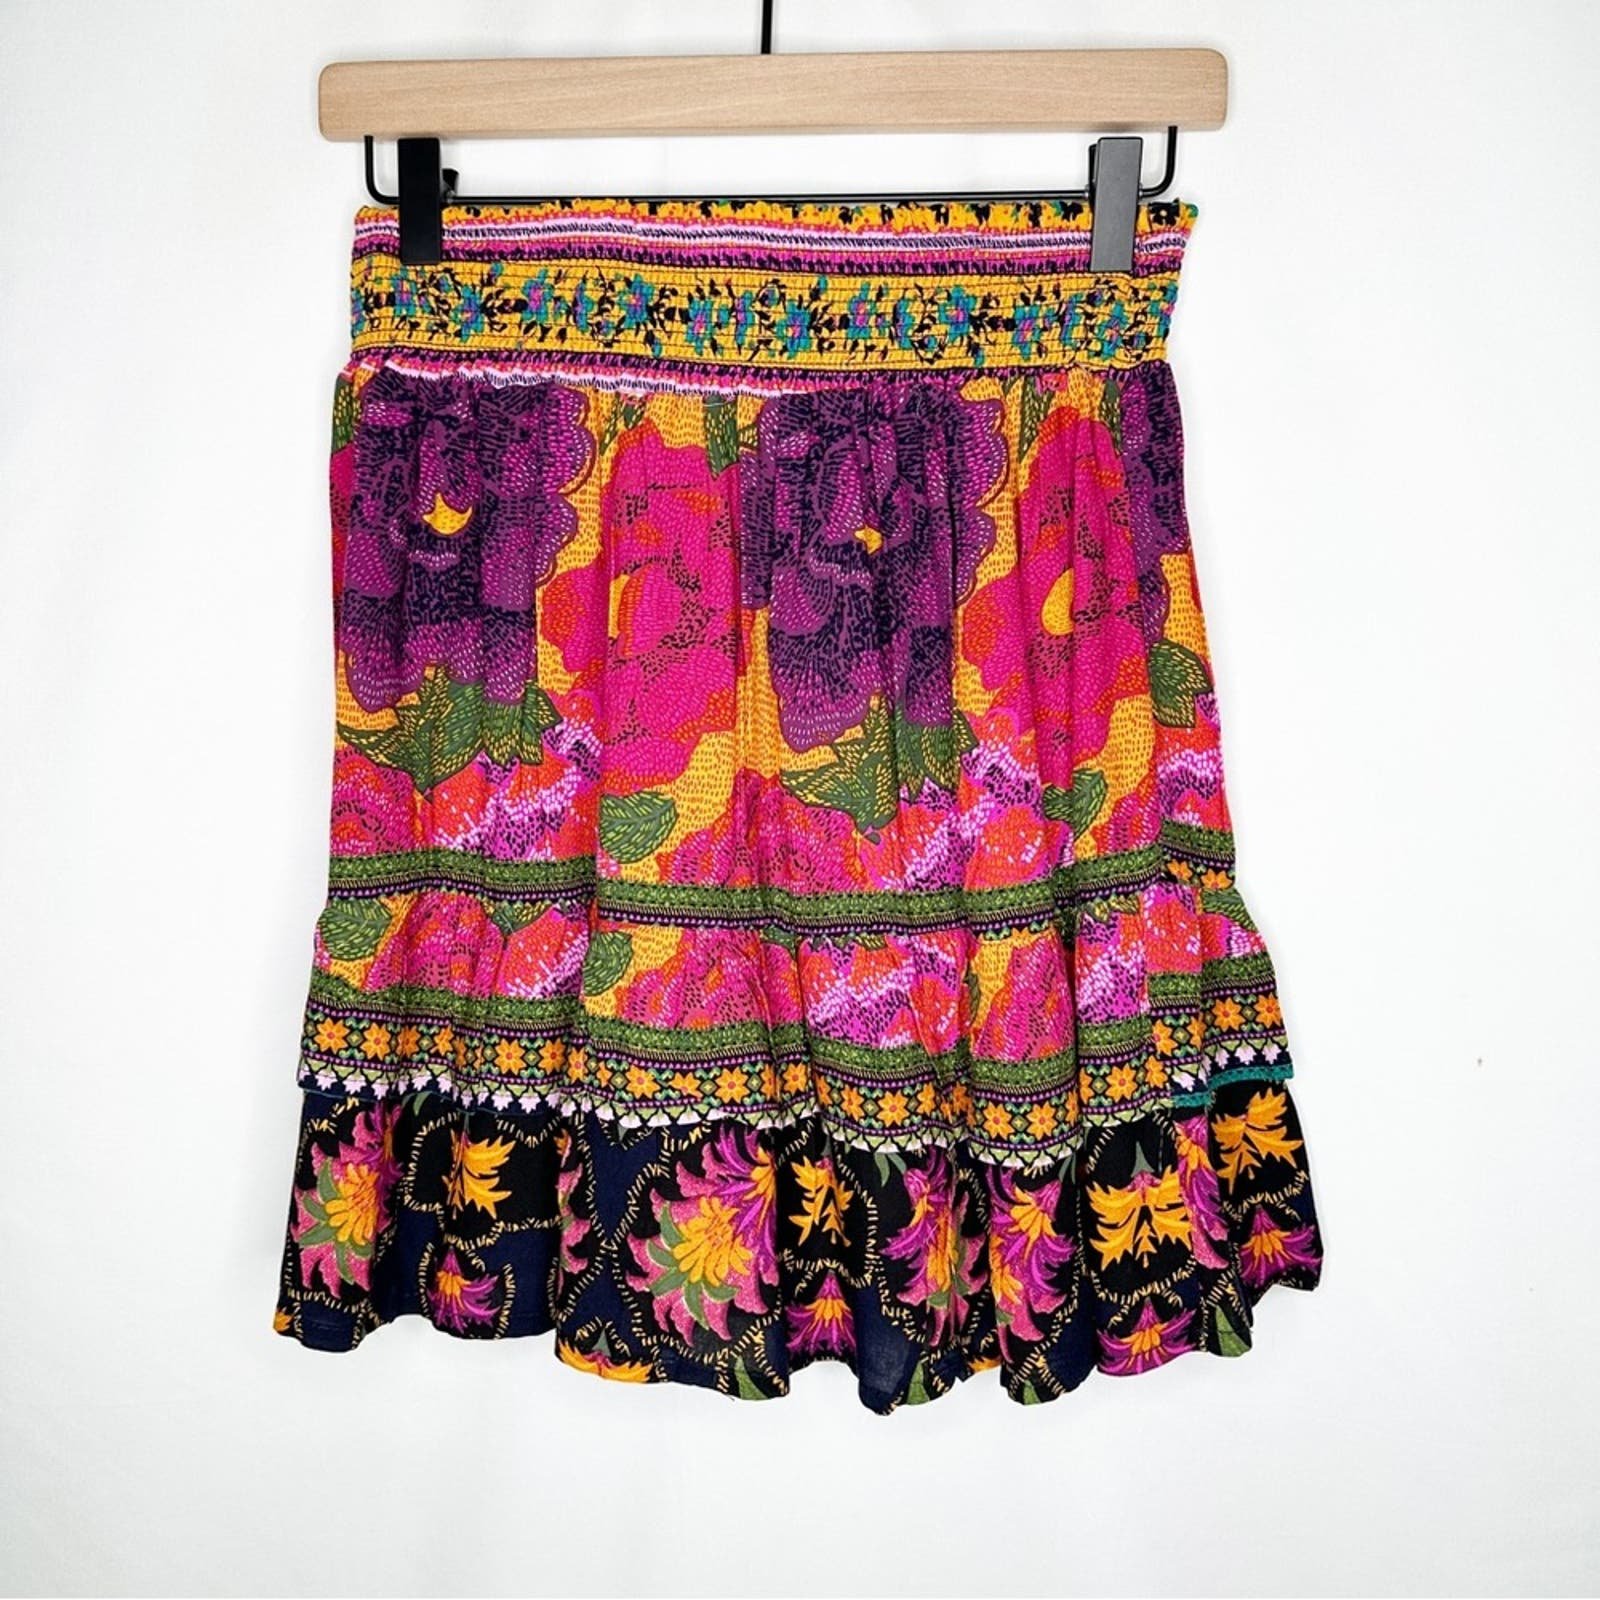 Factory Direct  RACHEL ROY Floral Skirt NWT in Size Medium PMTlVuwwU US Outlet